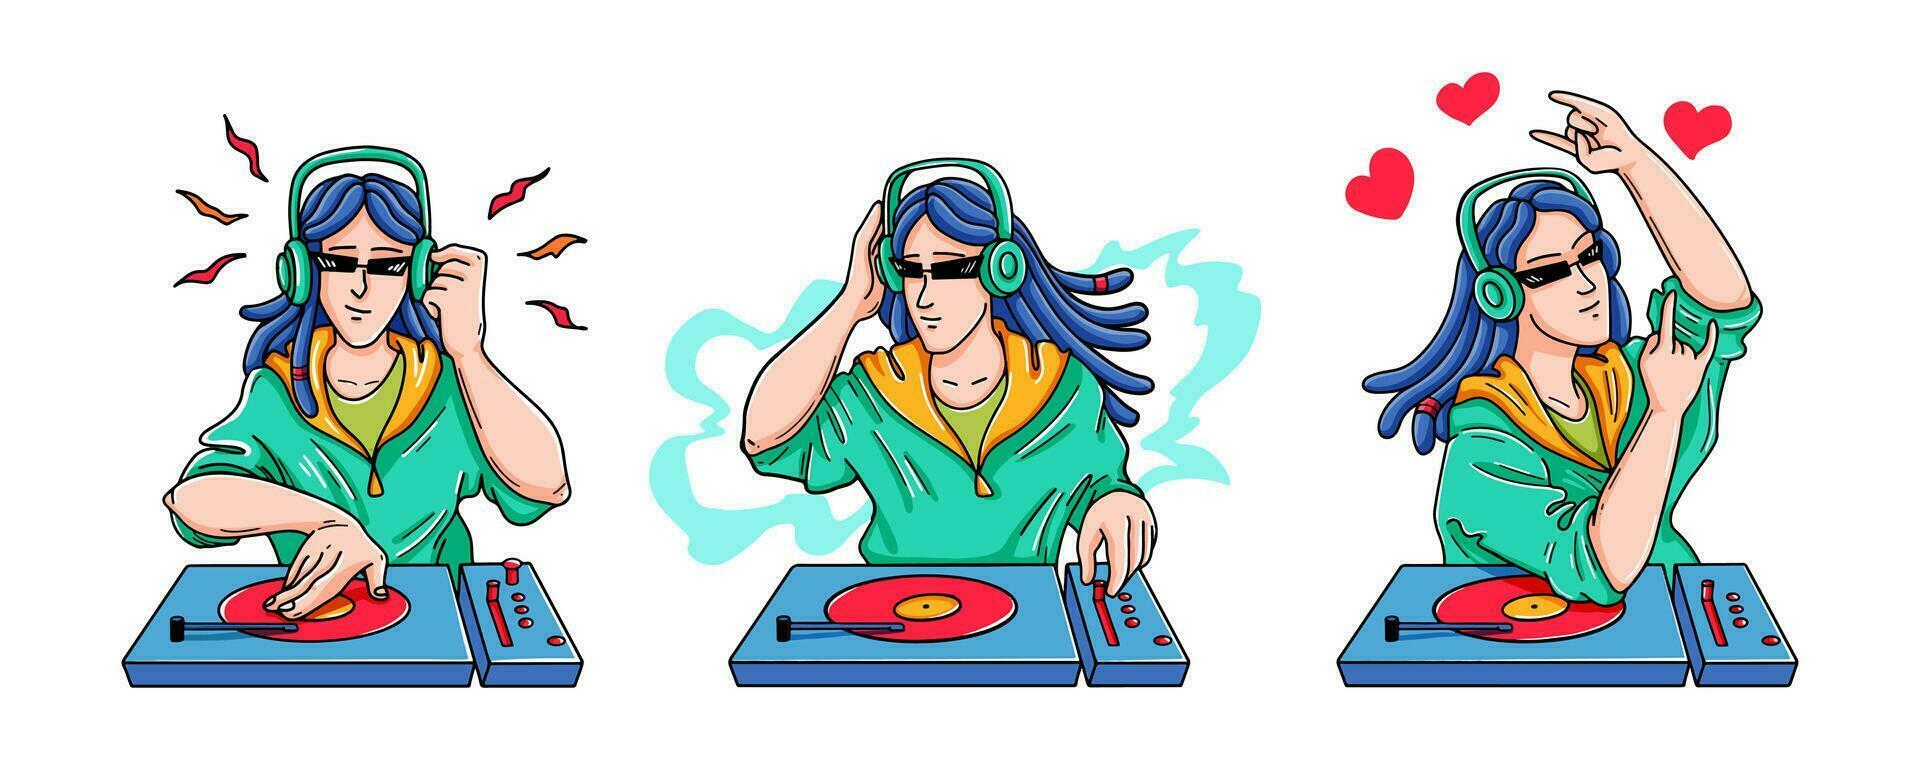 Dj characters at console. Female and male musicians with turntable mixer. vector